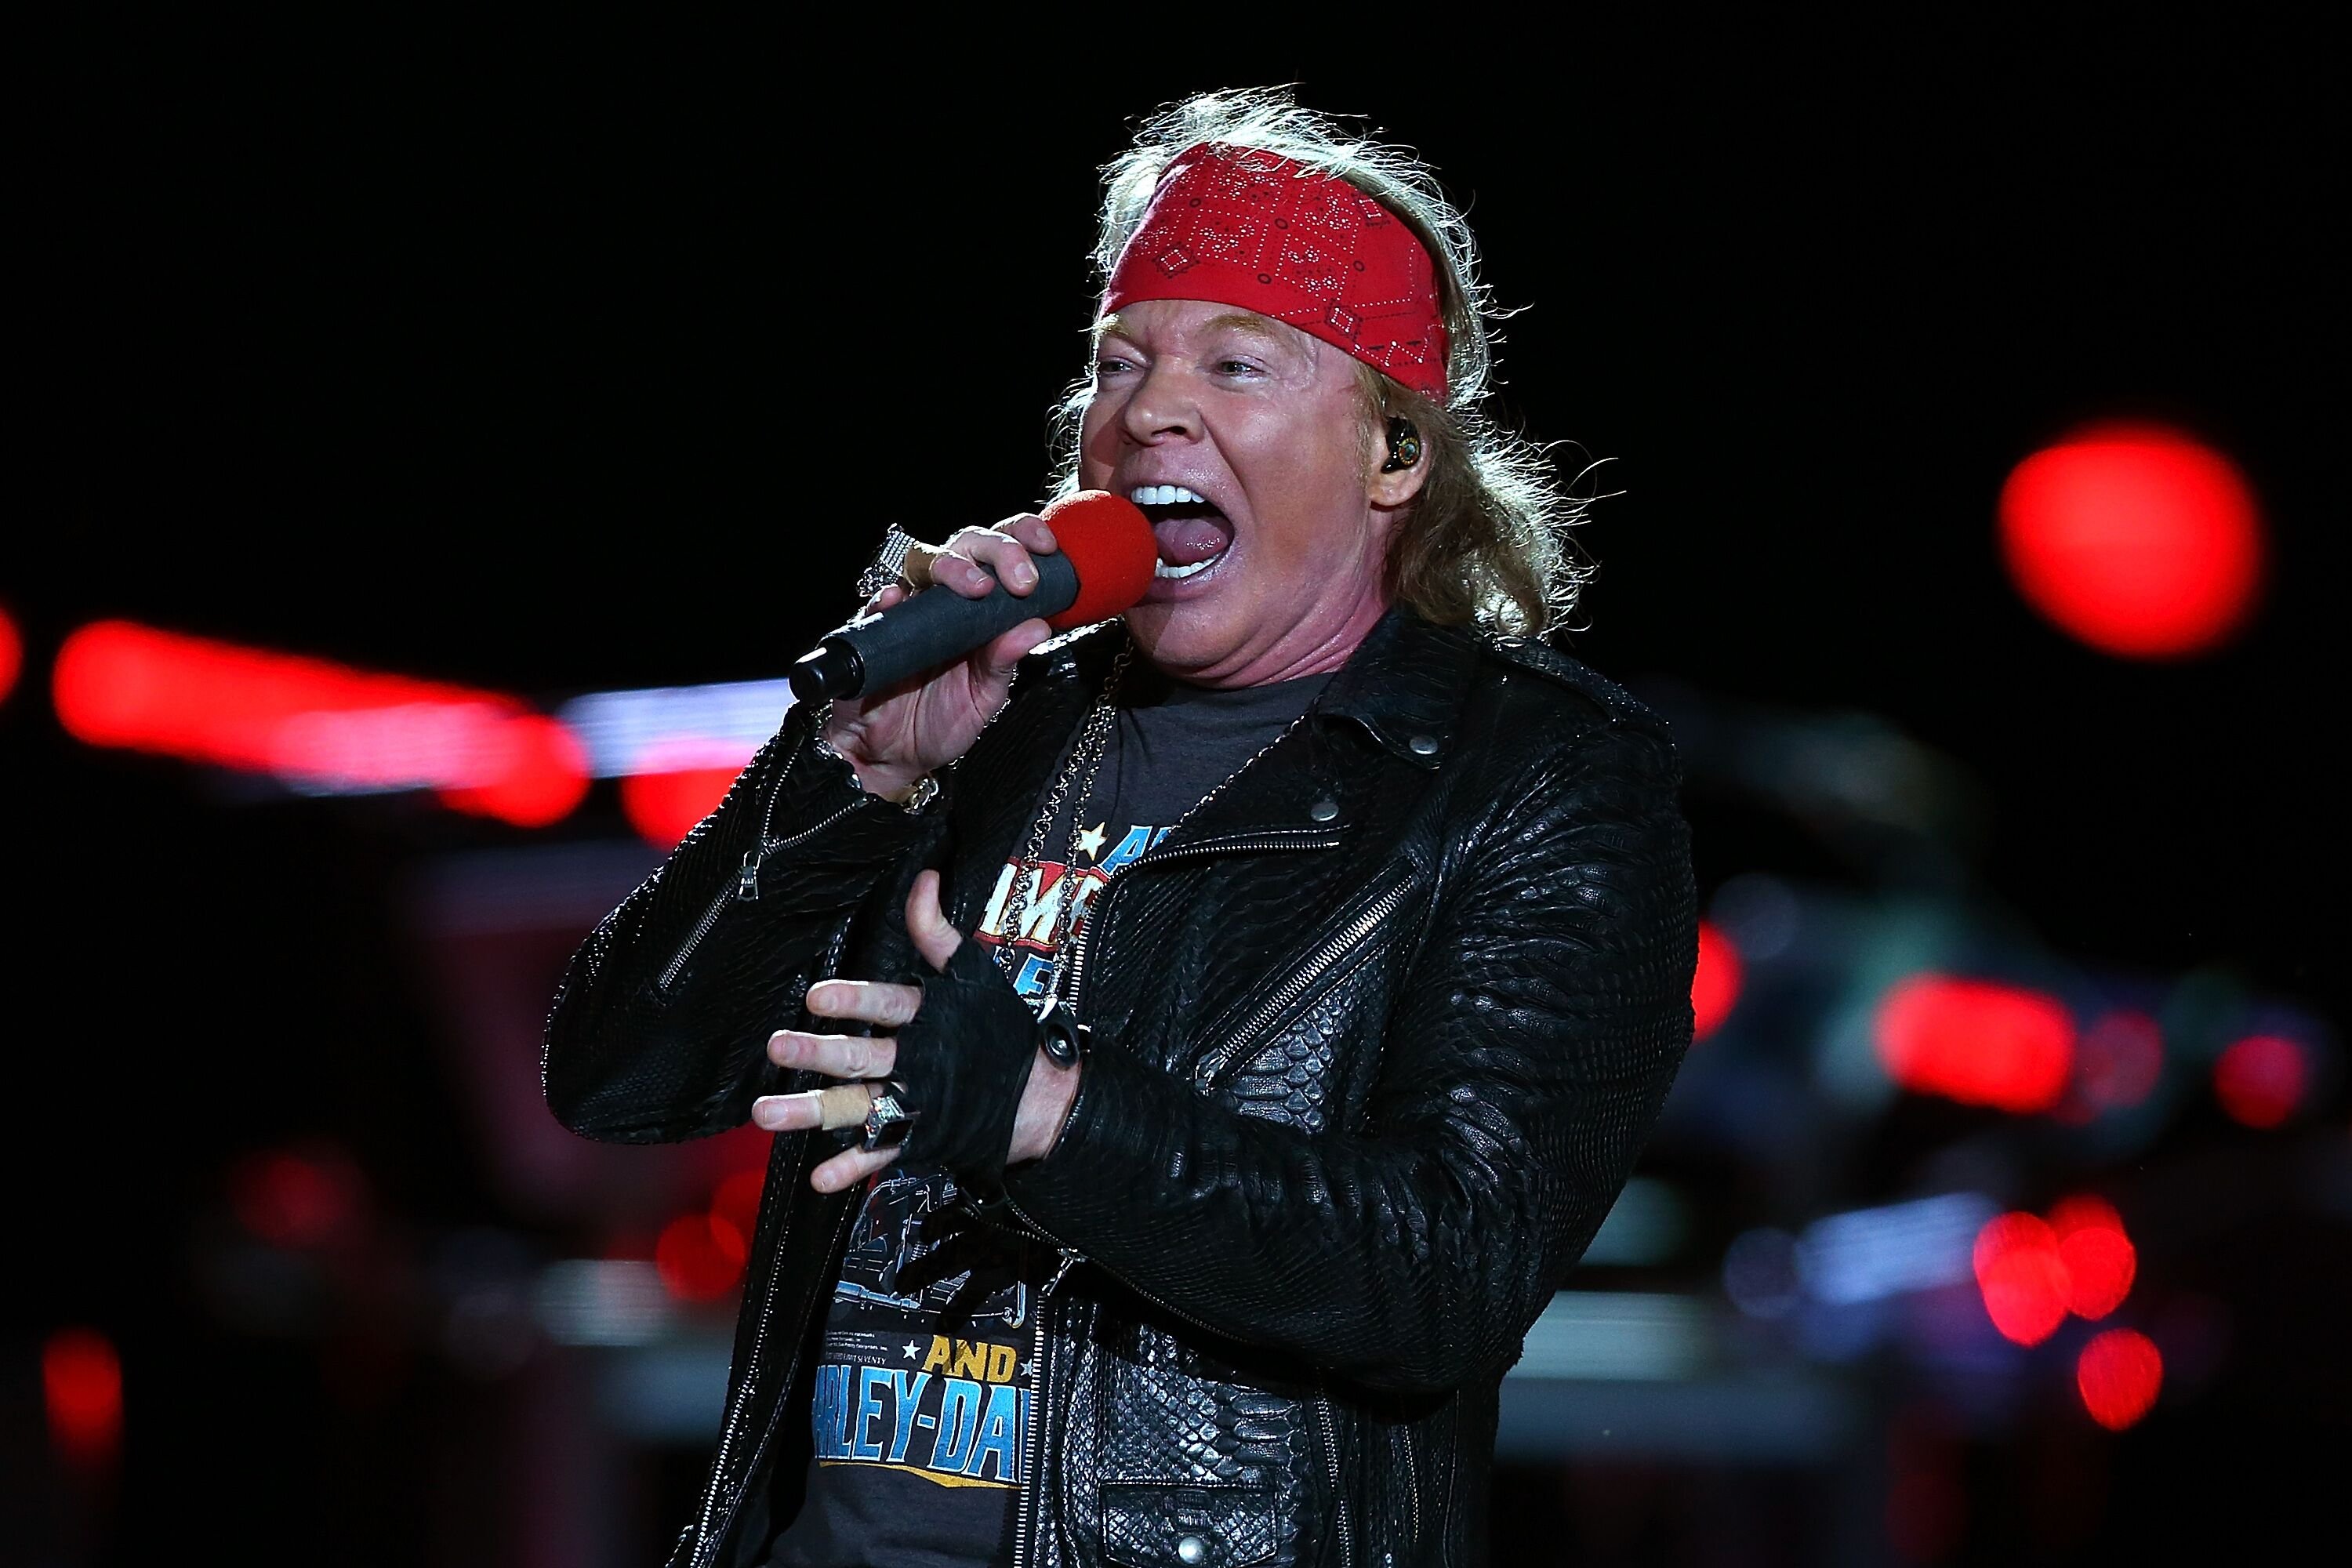 Axel Rose during the Guns N' Roses "Not in This Lifetime" tour concert at Domain Stadium in Perth, Australia | Photo: Getty Images